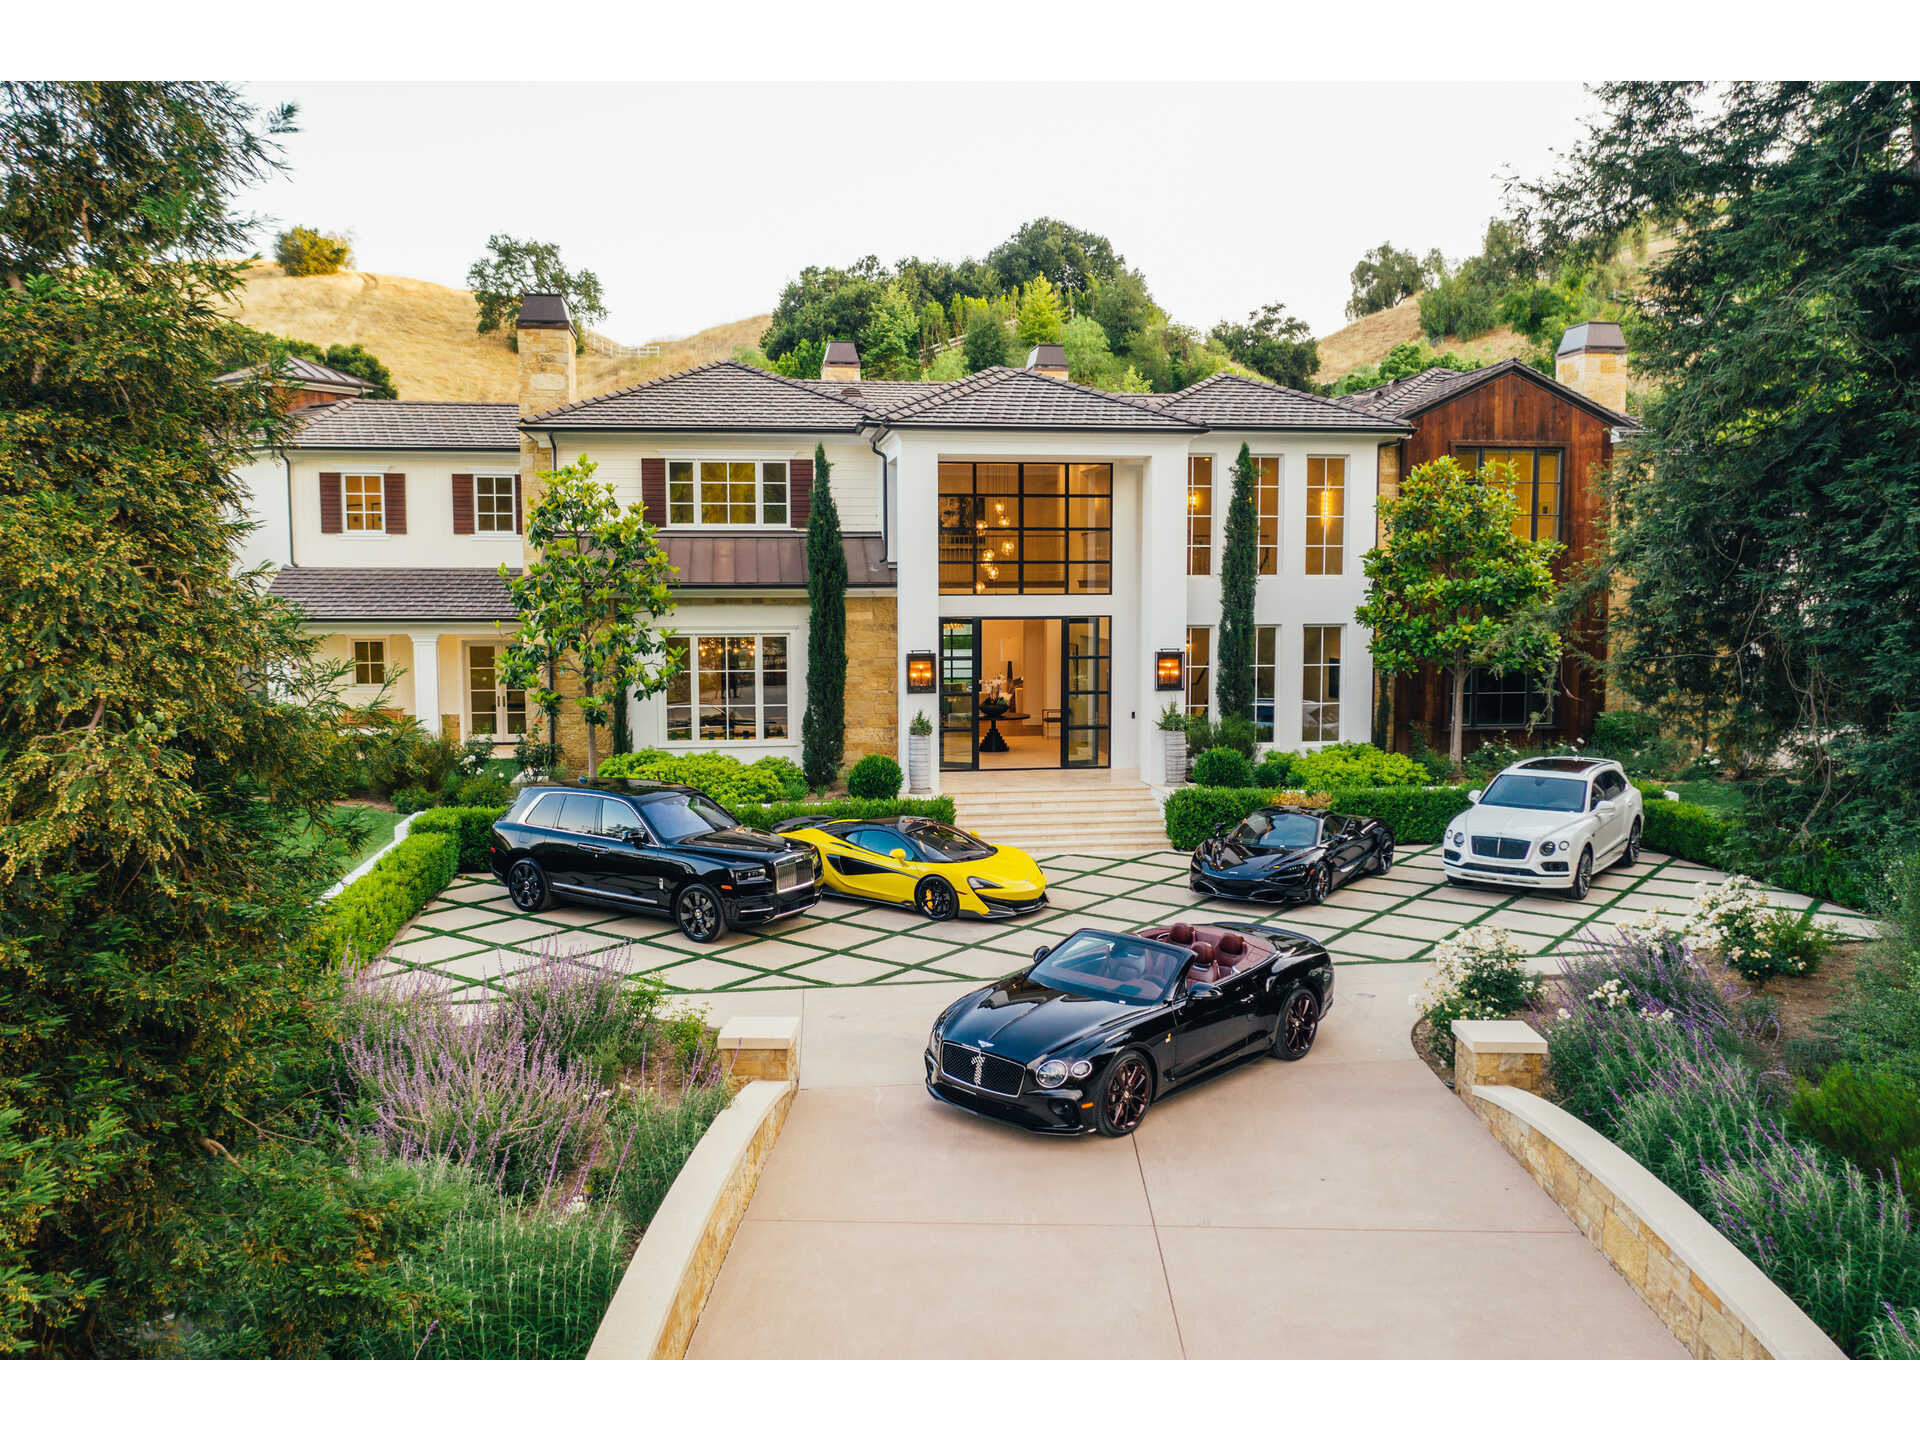 The Weeknd Lists LA Mansion For $36 Million